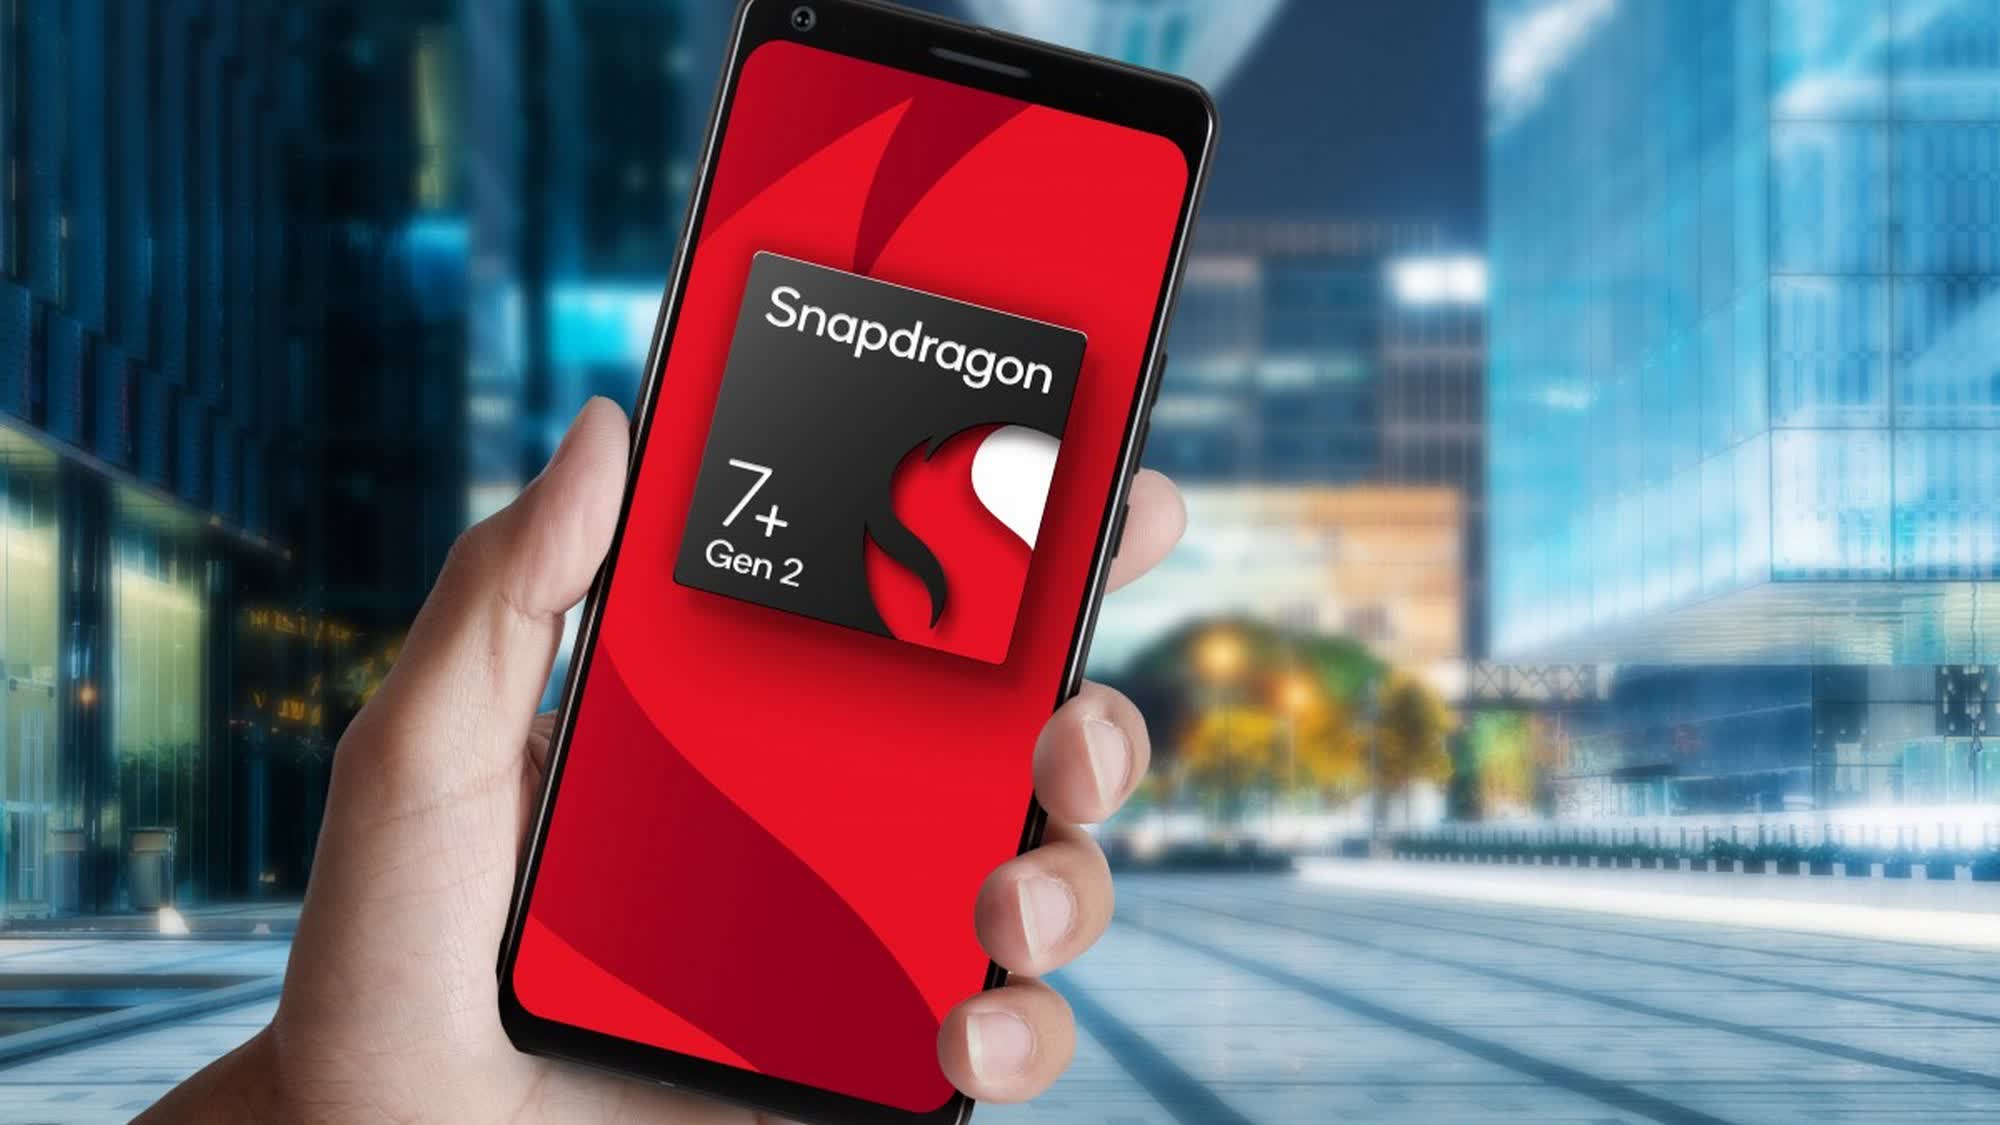 Qualcomm Snapdragon 7+ Gen 2 brings faster performance, better photography, and more